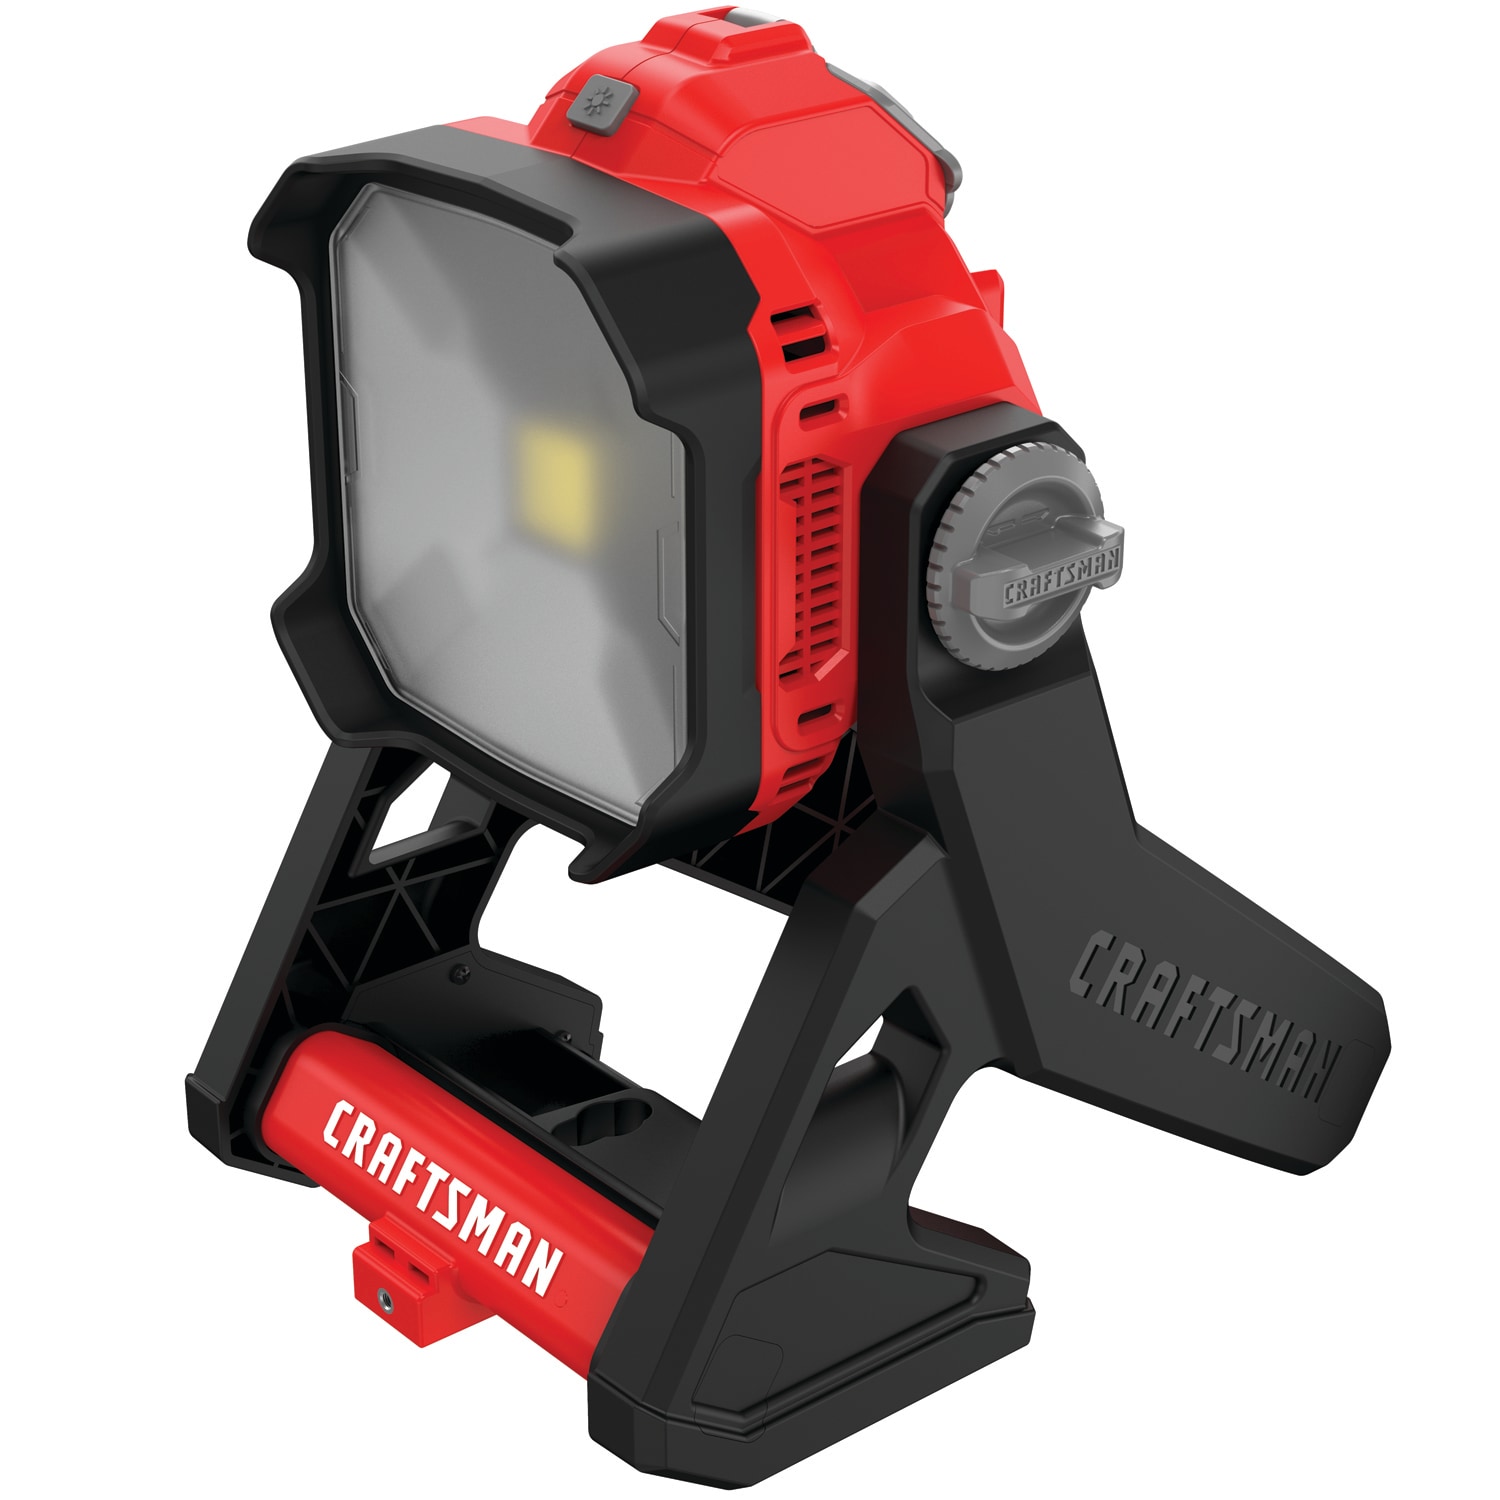 For Craftsman Light, Waxpar 18w 2000lm Led Work Light Spotlight Jobsite  Light Powered By Craftsman V20 Lithium-ion Batteries Cmcb201with 110 Degree  Pi